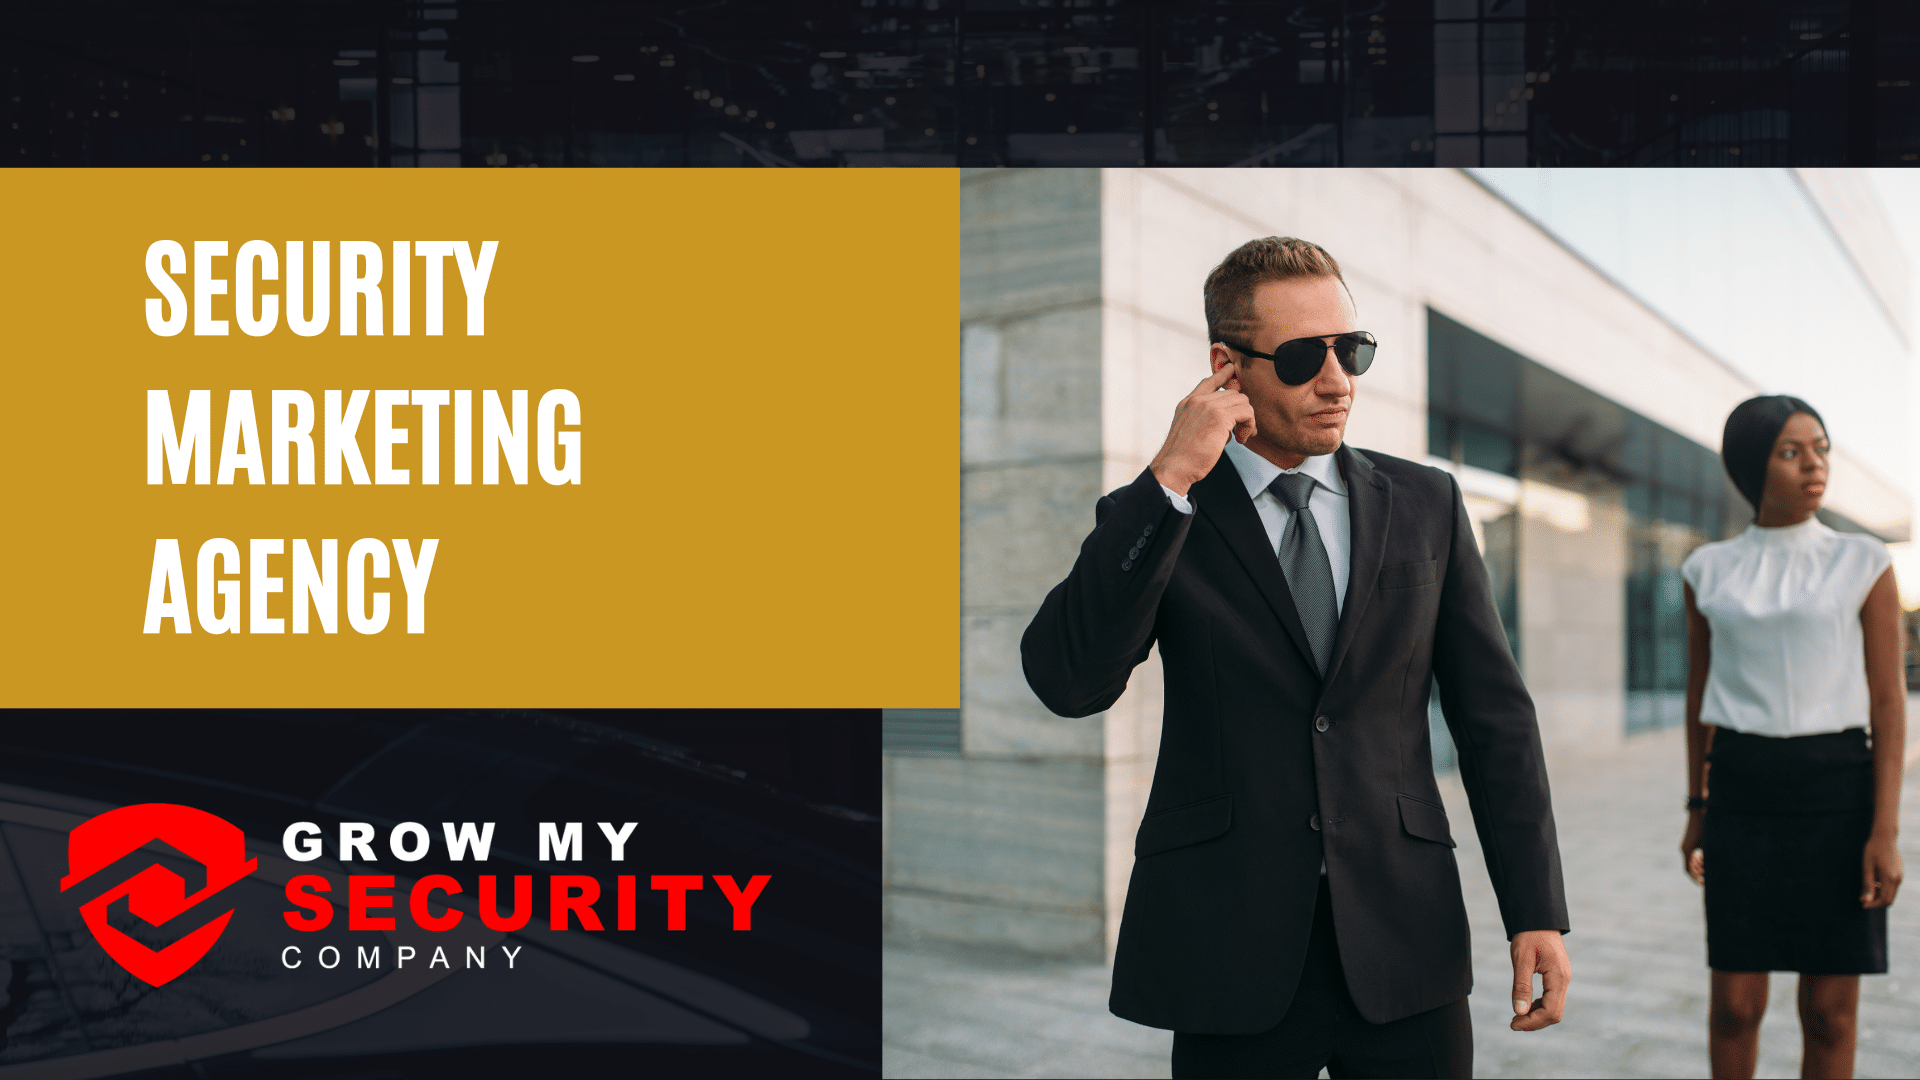 Security Marketing Agency - Collaborative Strategy for Security Company Growth